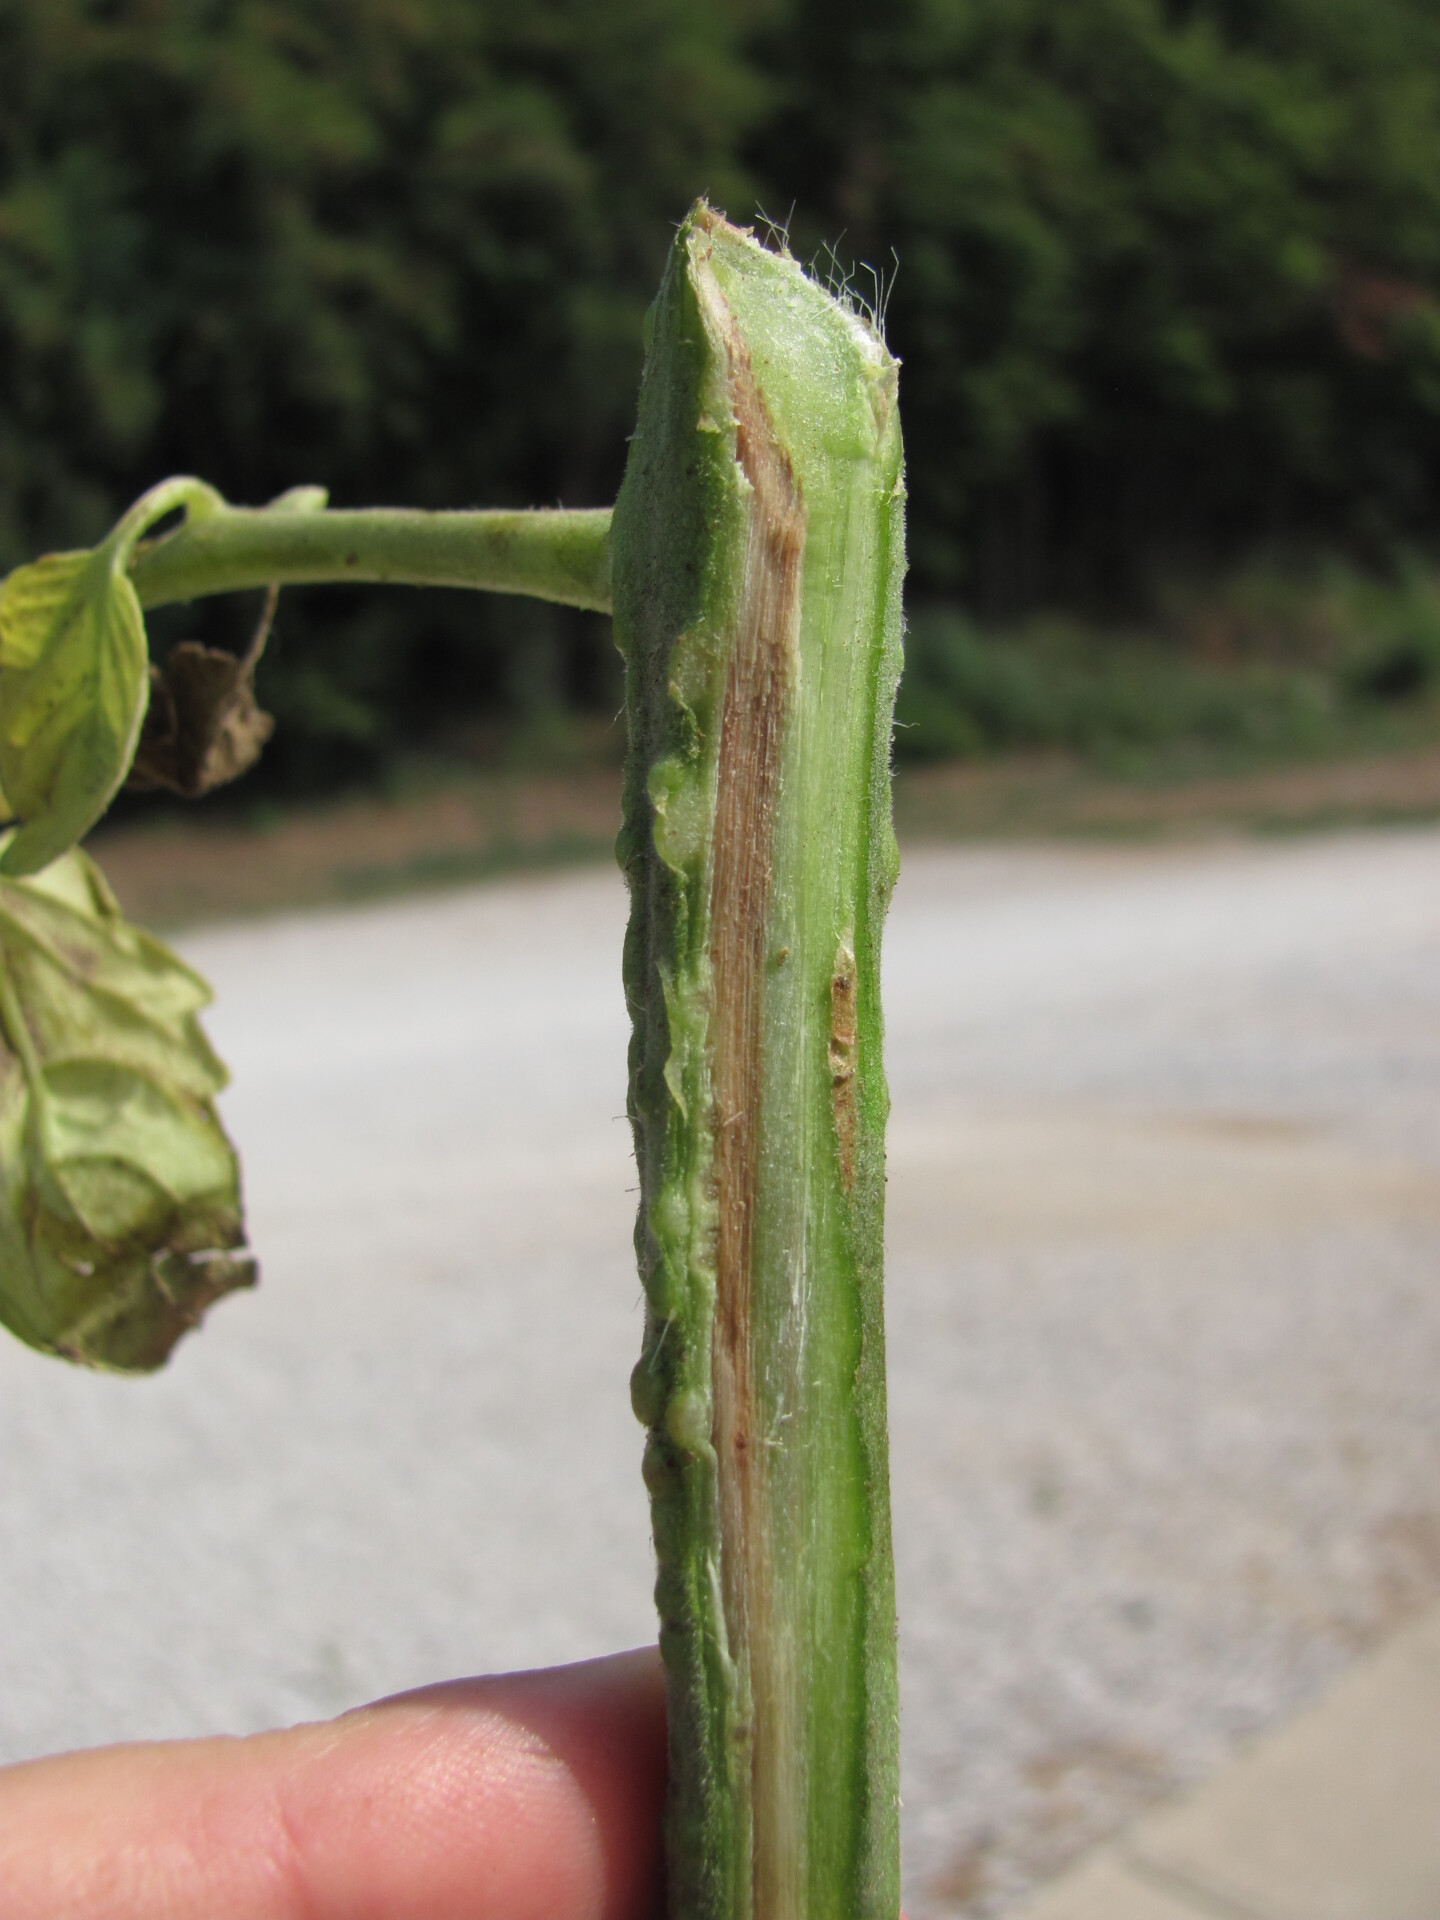 Fusarium wilt of tomato can cause a vascular discoloration of along one side of the stem.